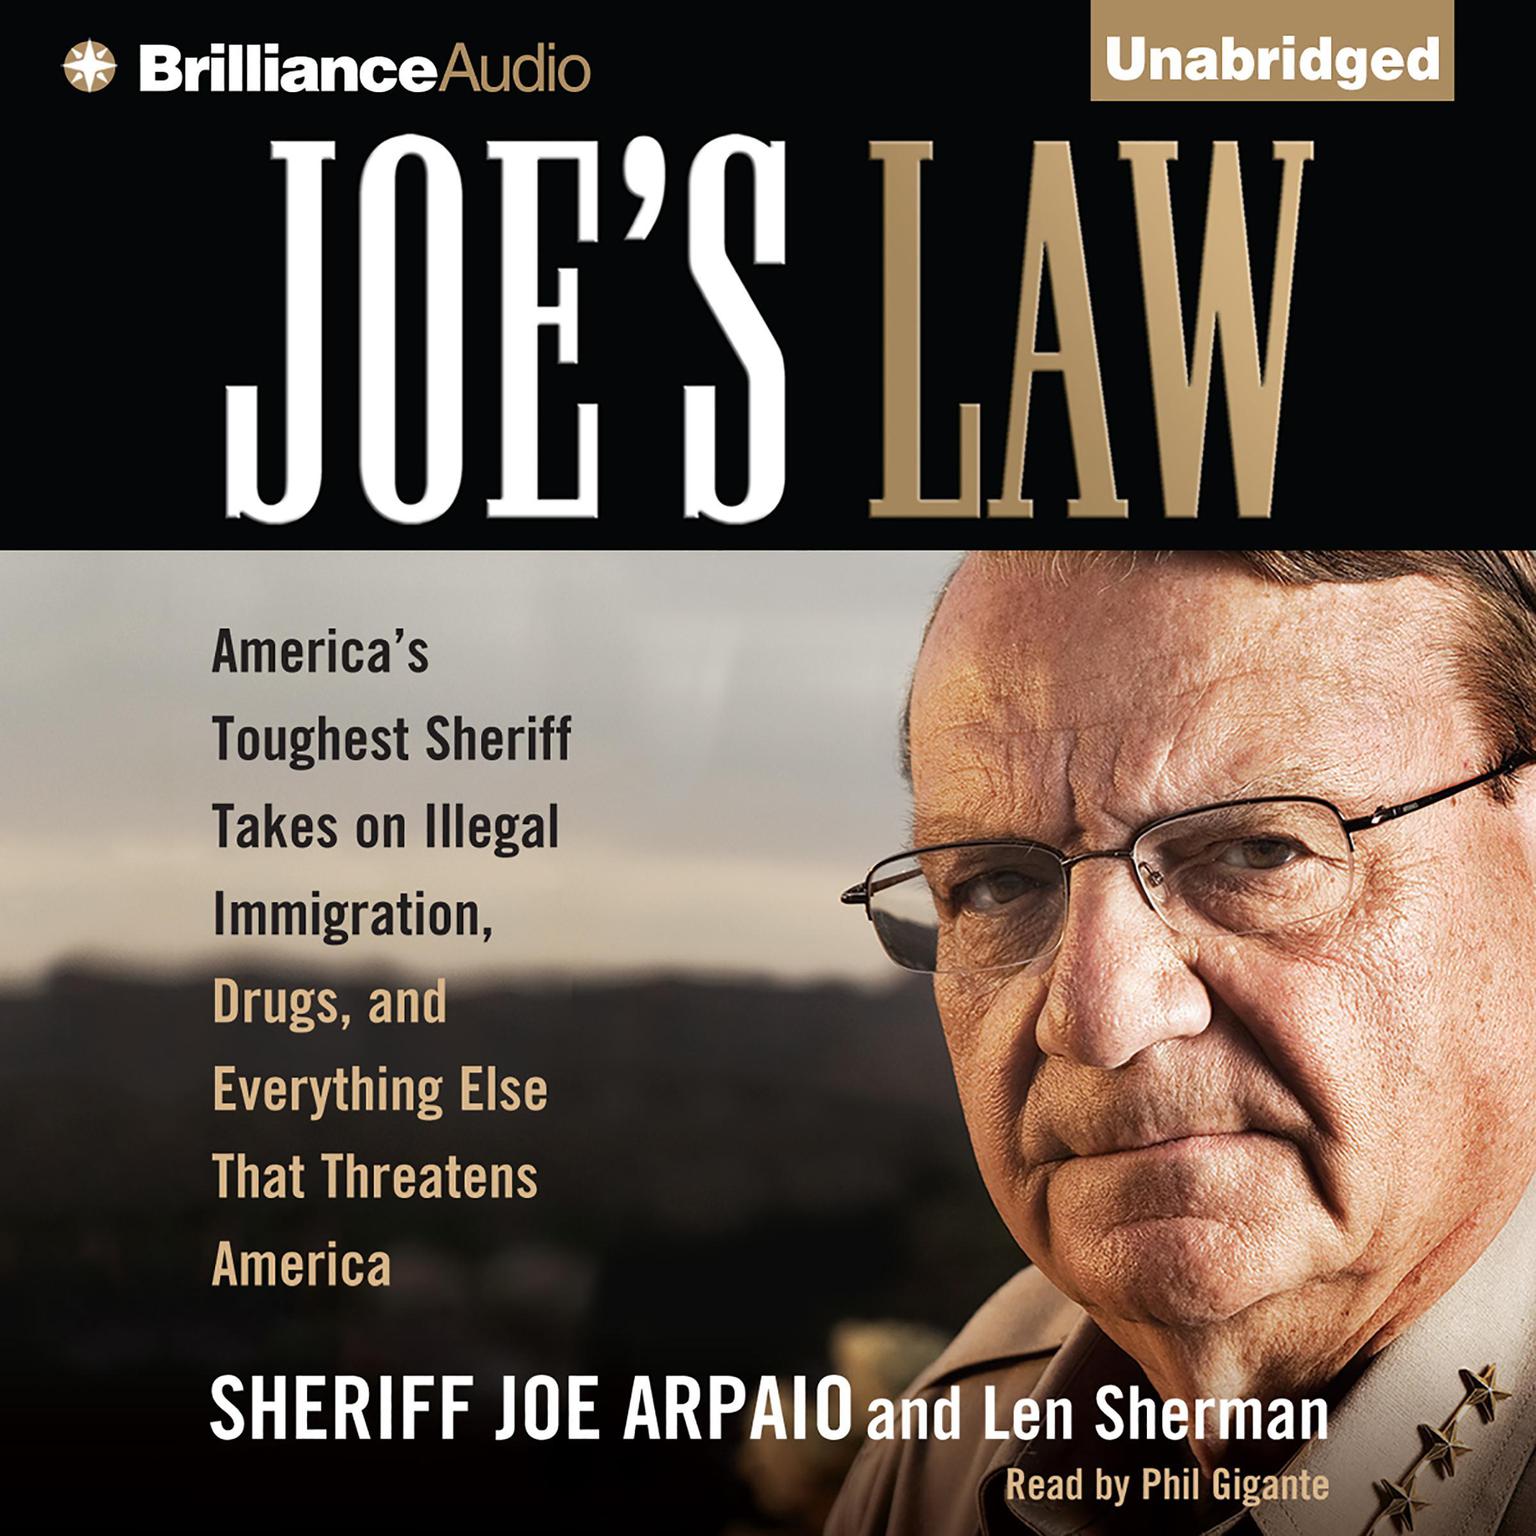 Joes Law: Americas Toughest Sheriff Takes on Illegal Immigration, Drugs, and Everything Else That Threatens America Audiobook, by Sheriff Joe Arpaio